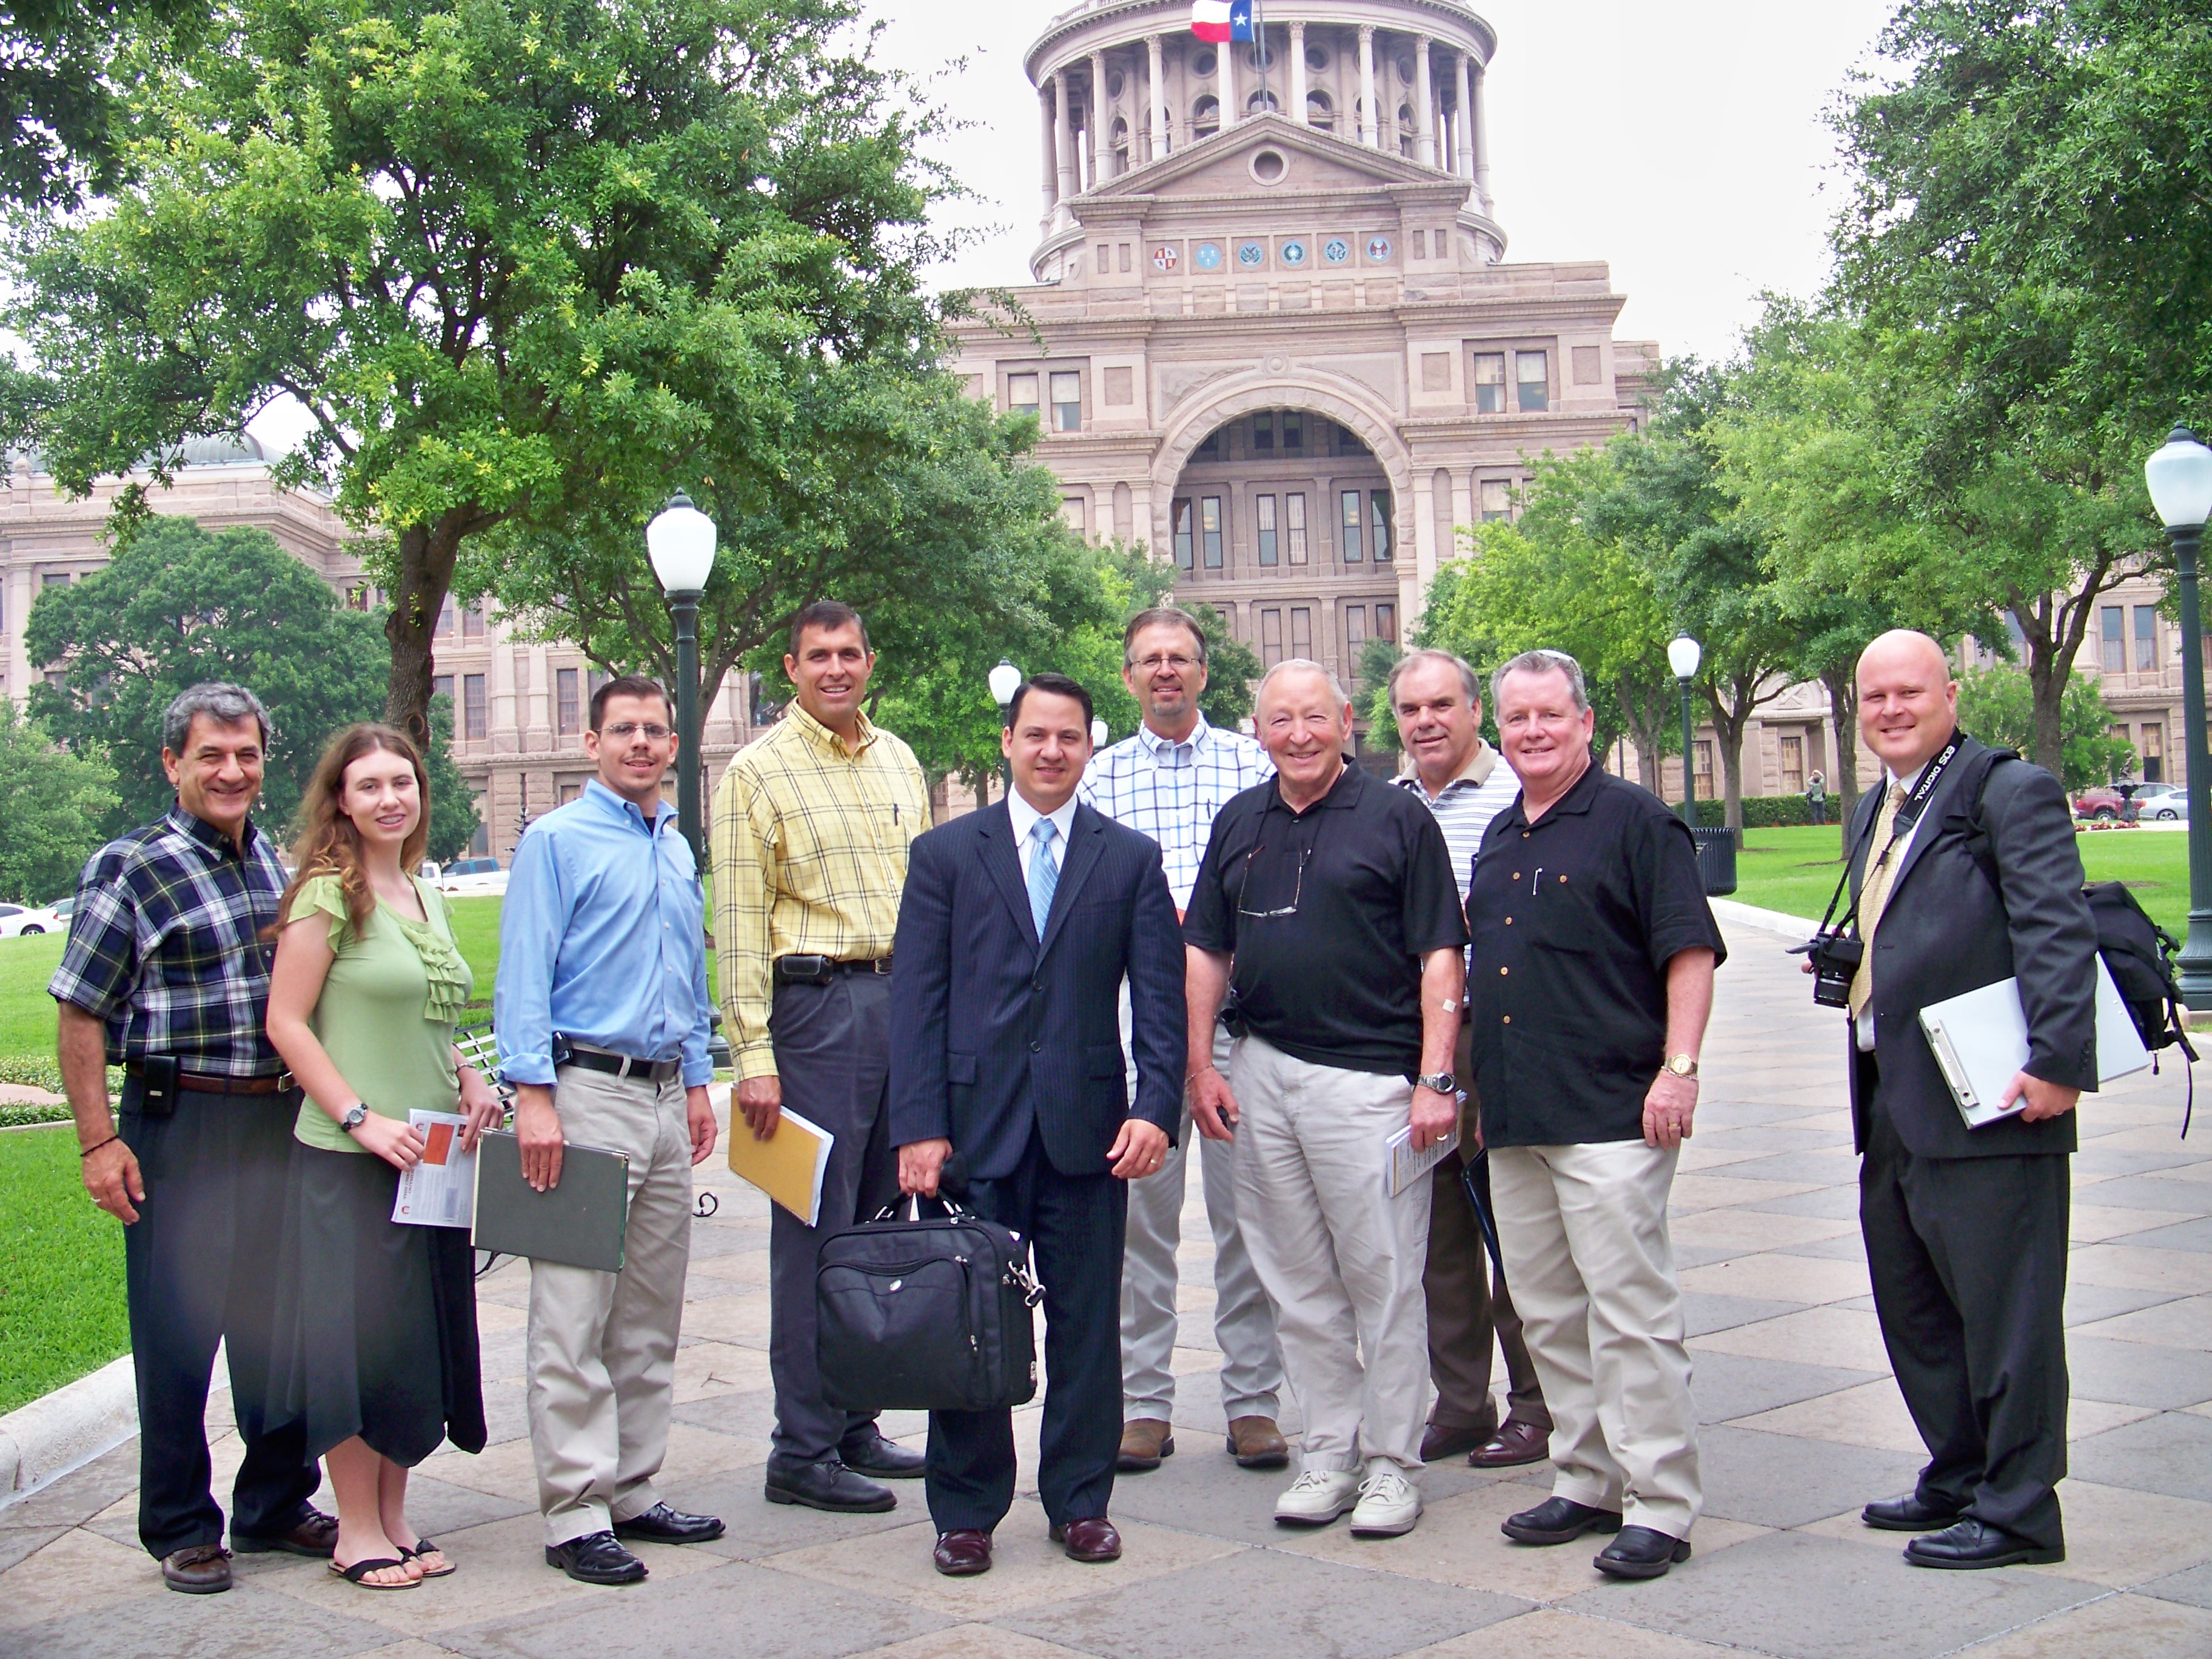 FMF meets with San Antonio pro-life activists at the Capitol